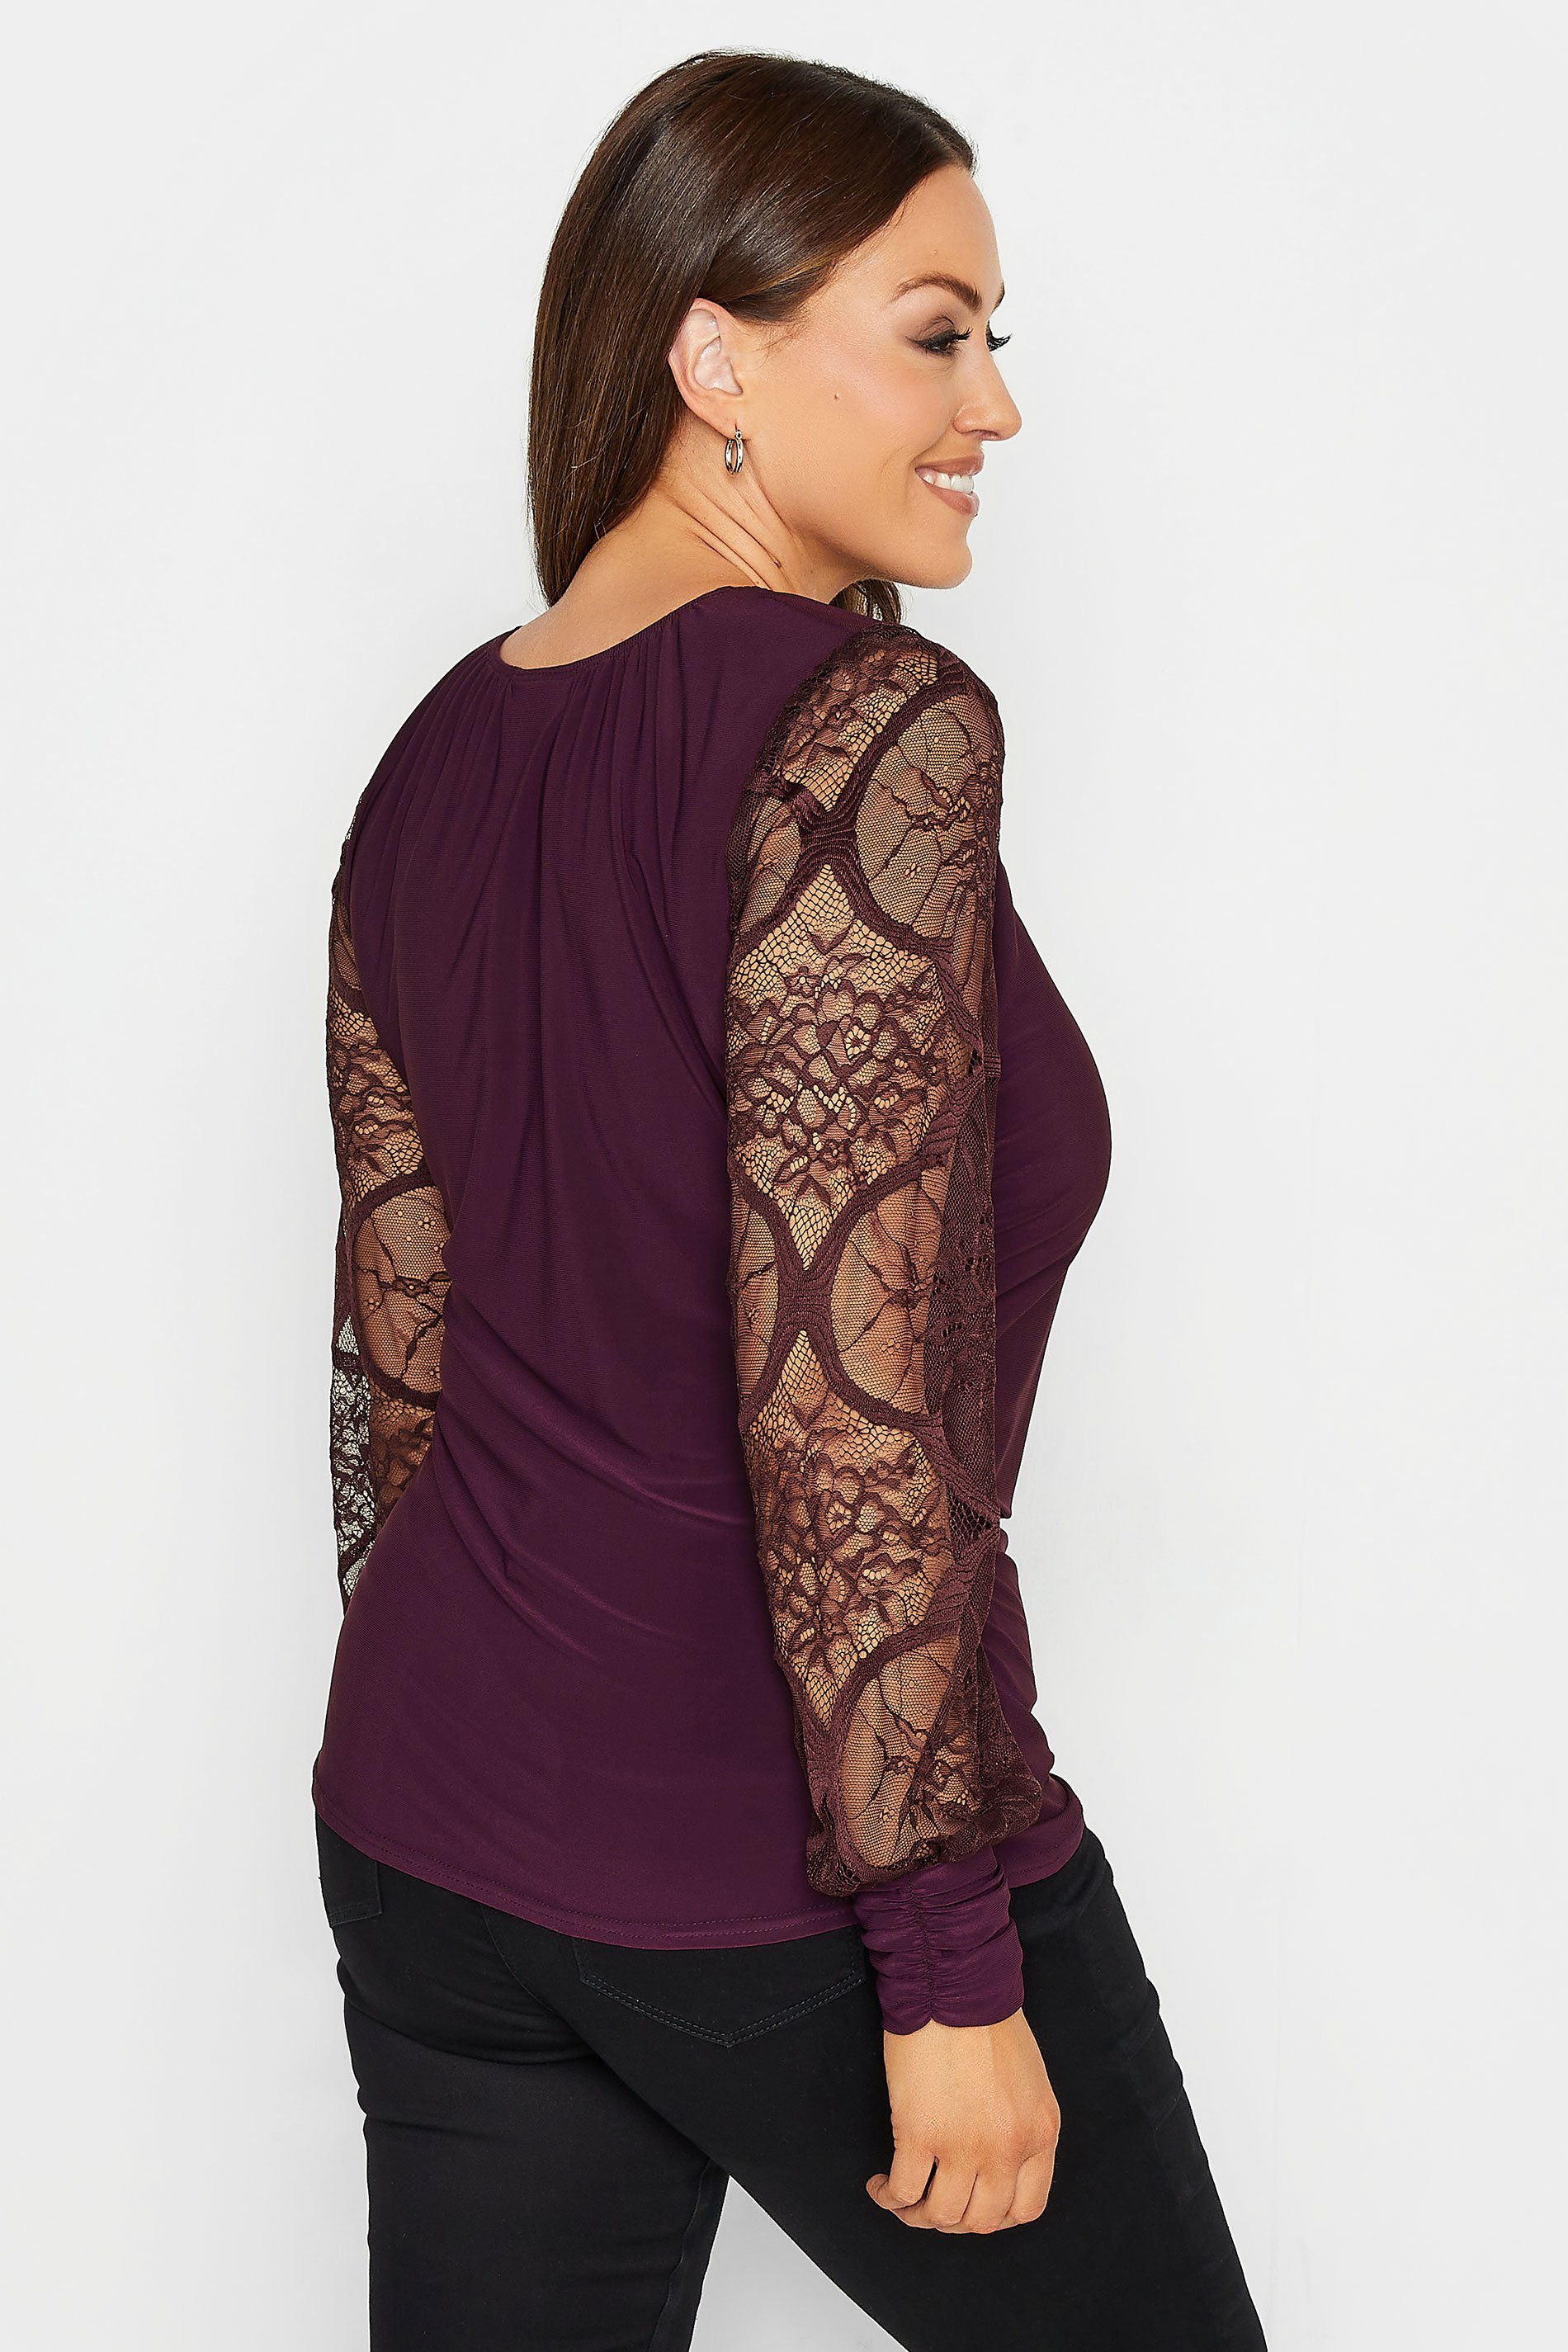 M&Co Burgundy Red Lace Long Sleeve Top | M&Co 3